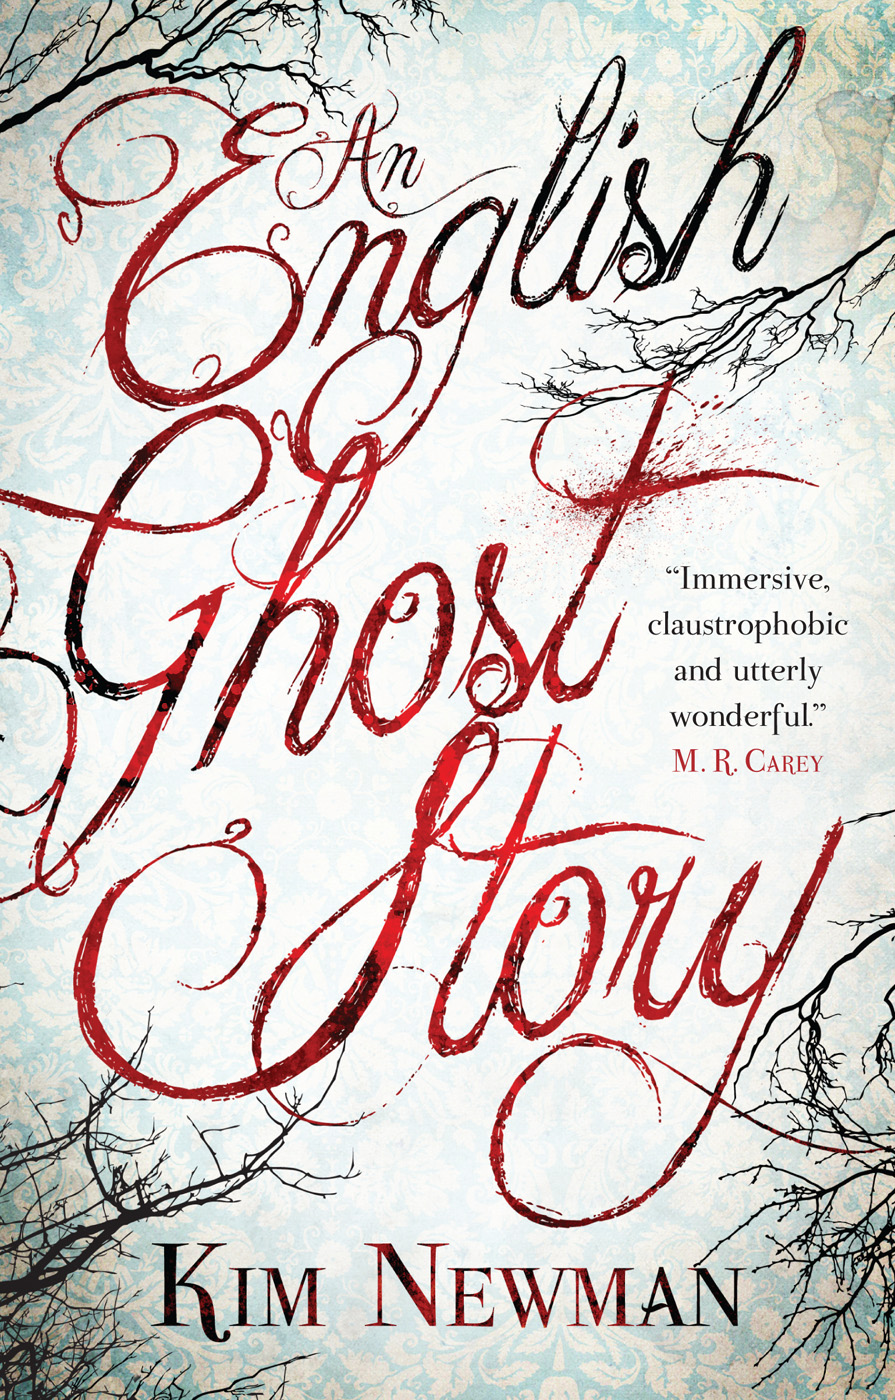 An English Ghost Story by Kim Newman